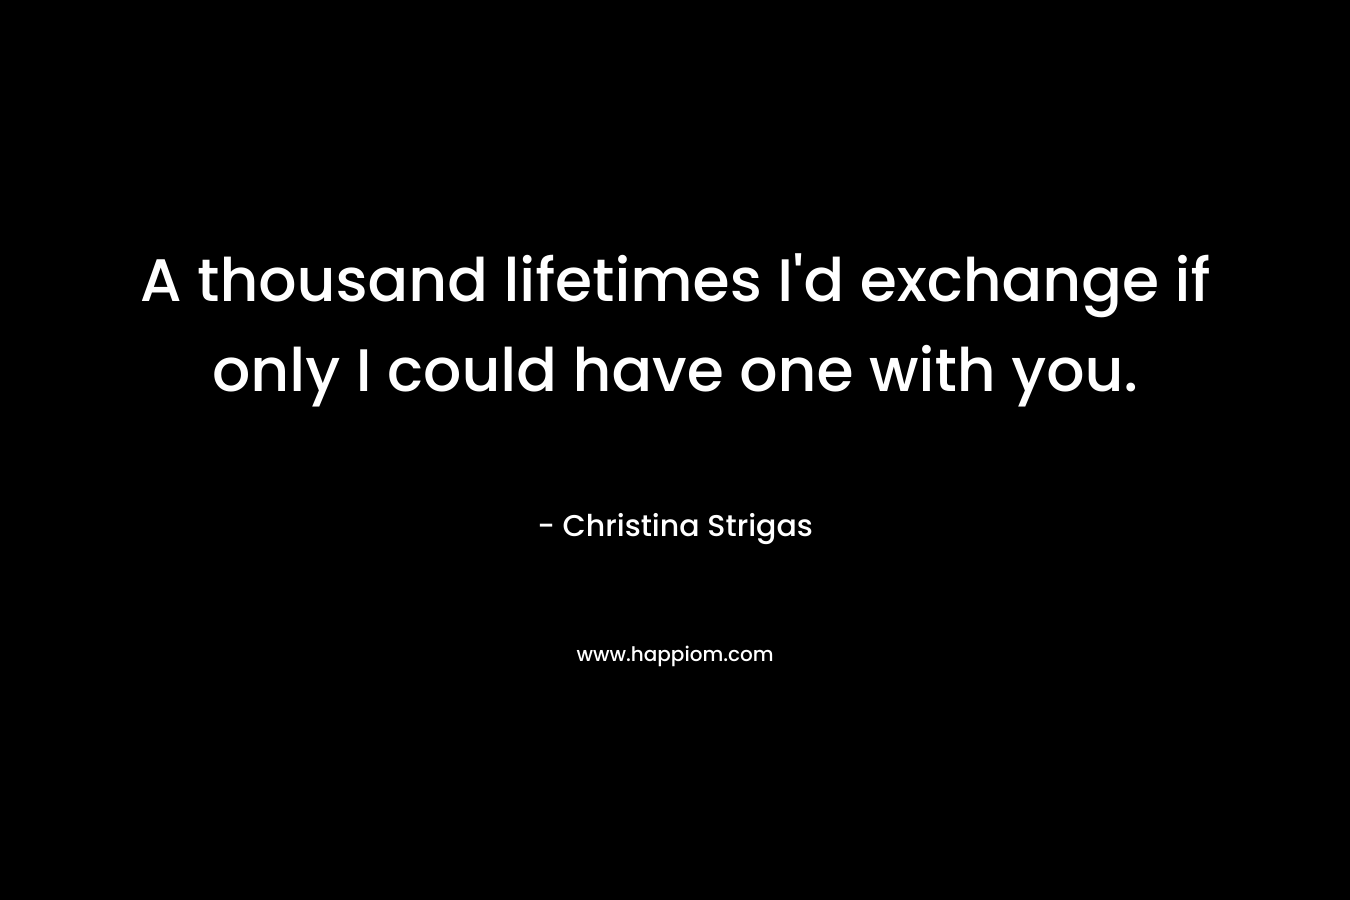 A thousand lifetimes I'd exchange if only I could have one with you.